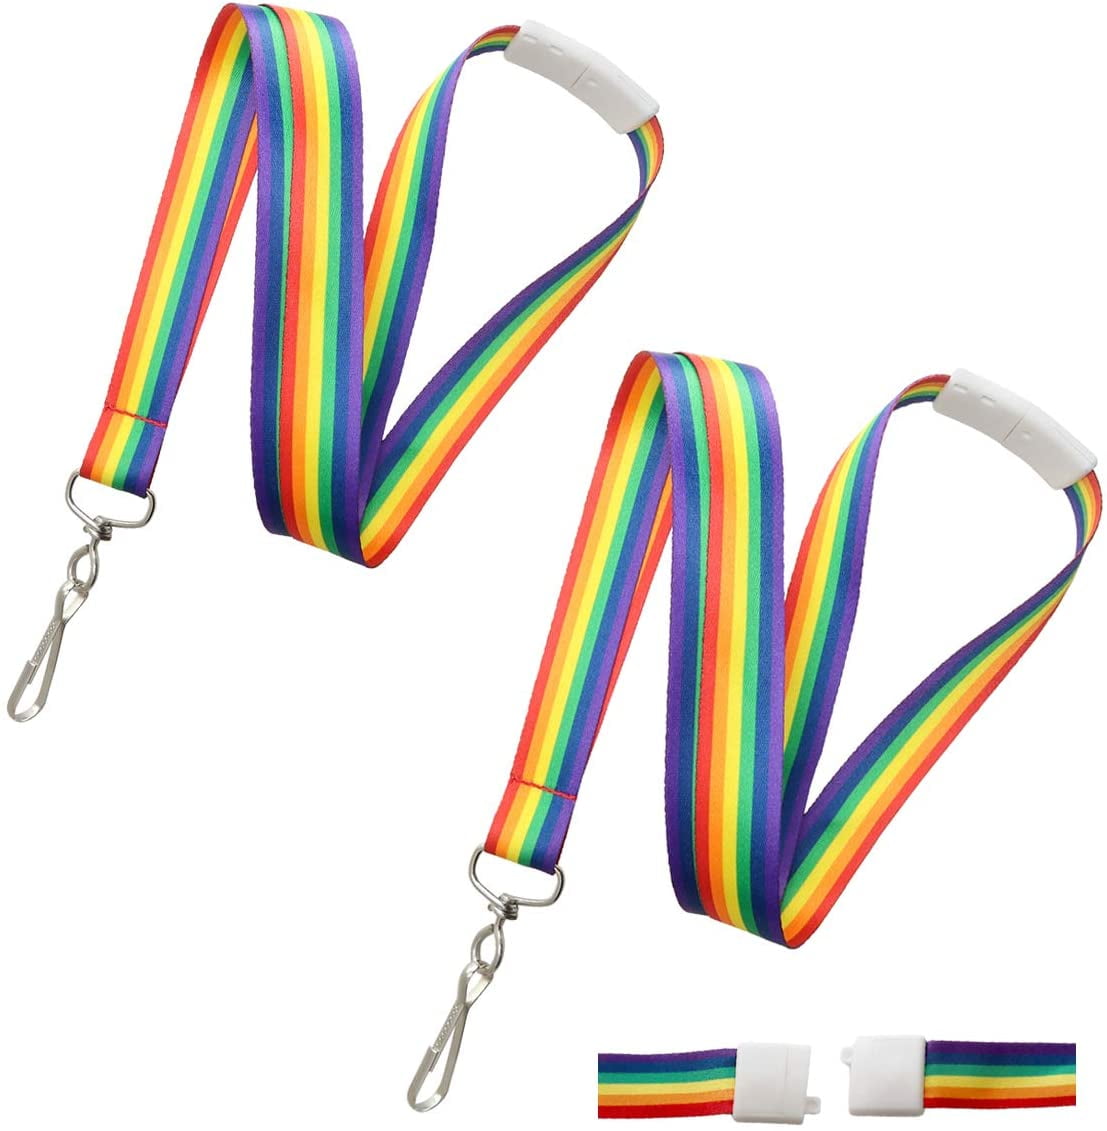 Zacs Alter Ego Rainbow Lanyard with Safety Break Away Clip and Metal Hook Clip